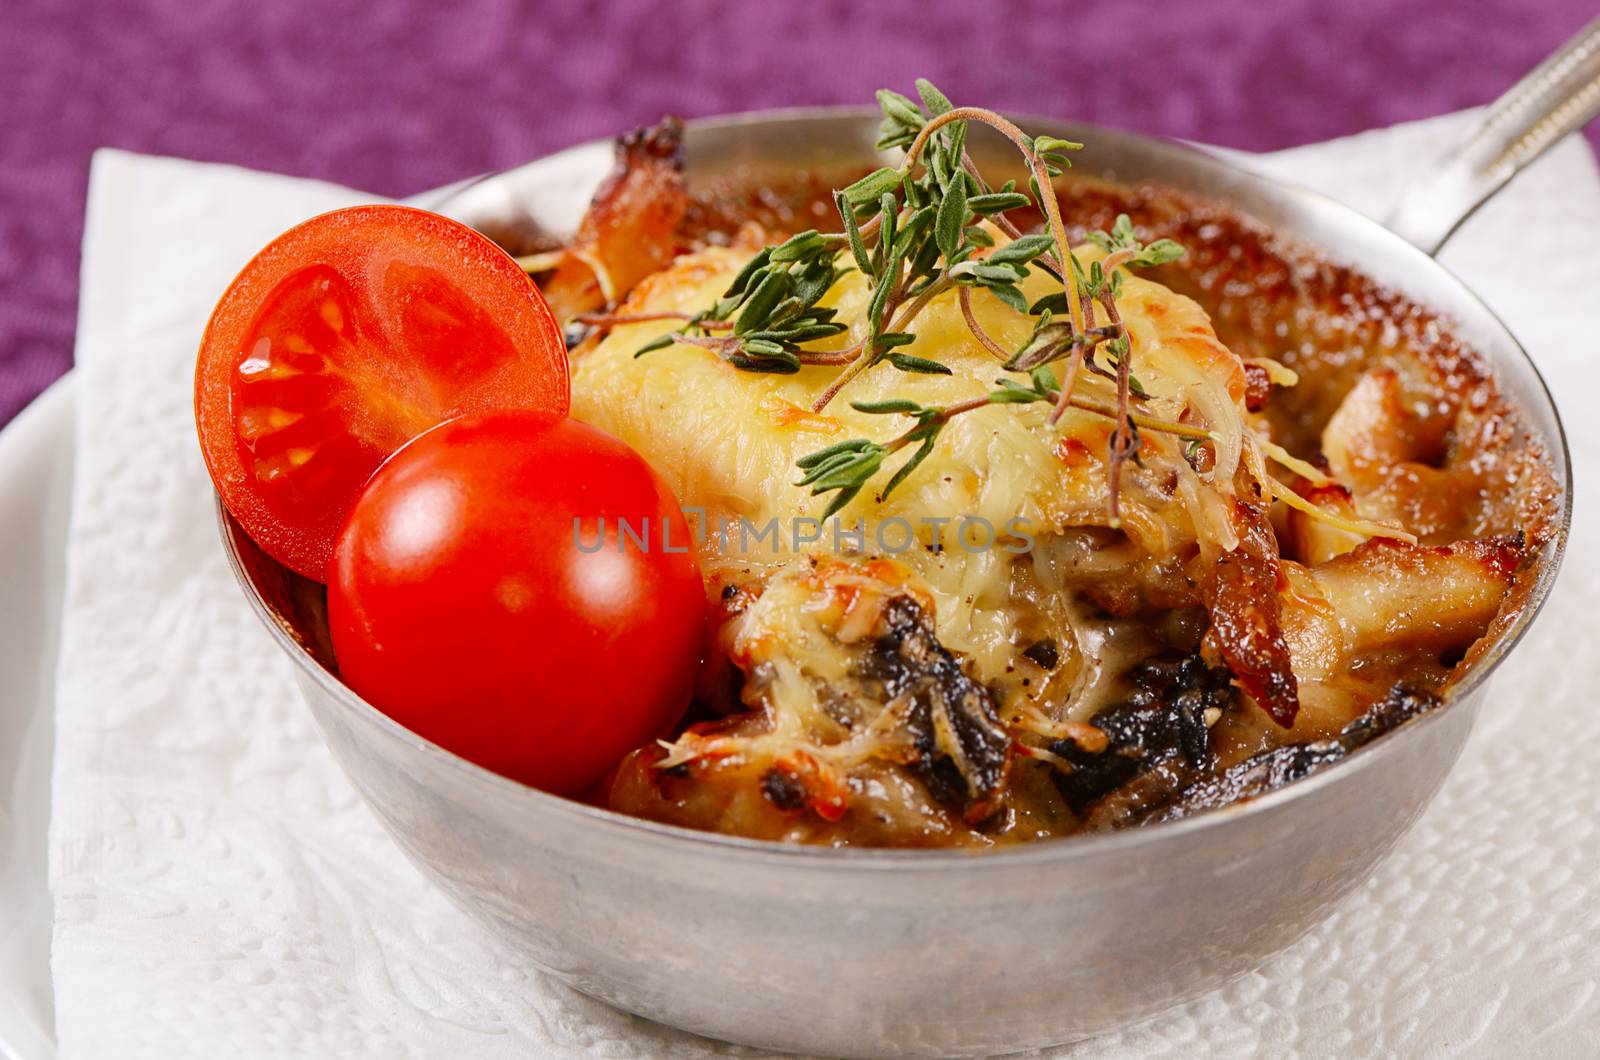 The Julienne with chicken, mushrooms and cheese